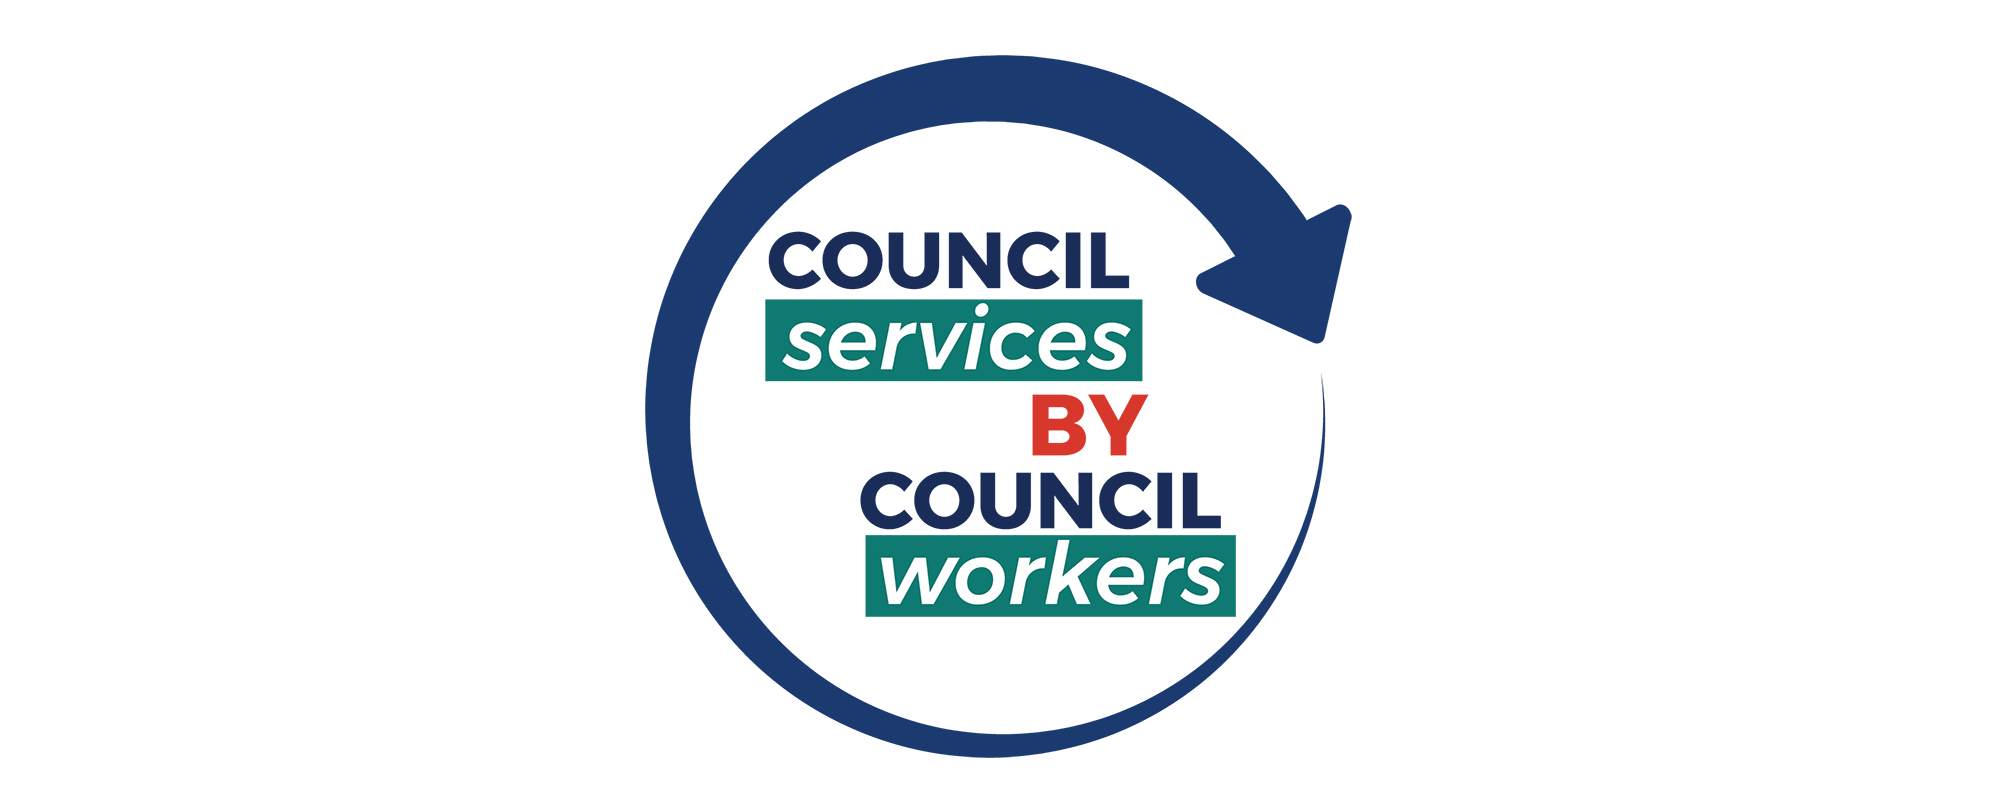 council services by council workers